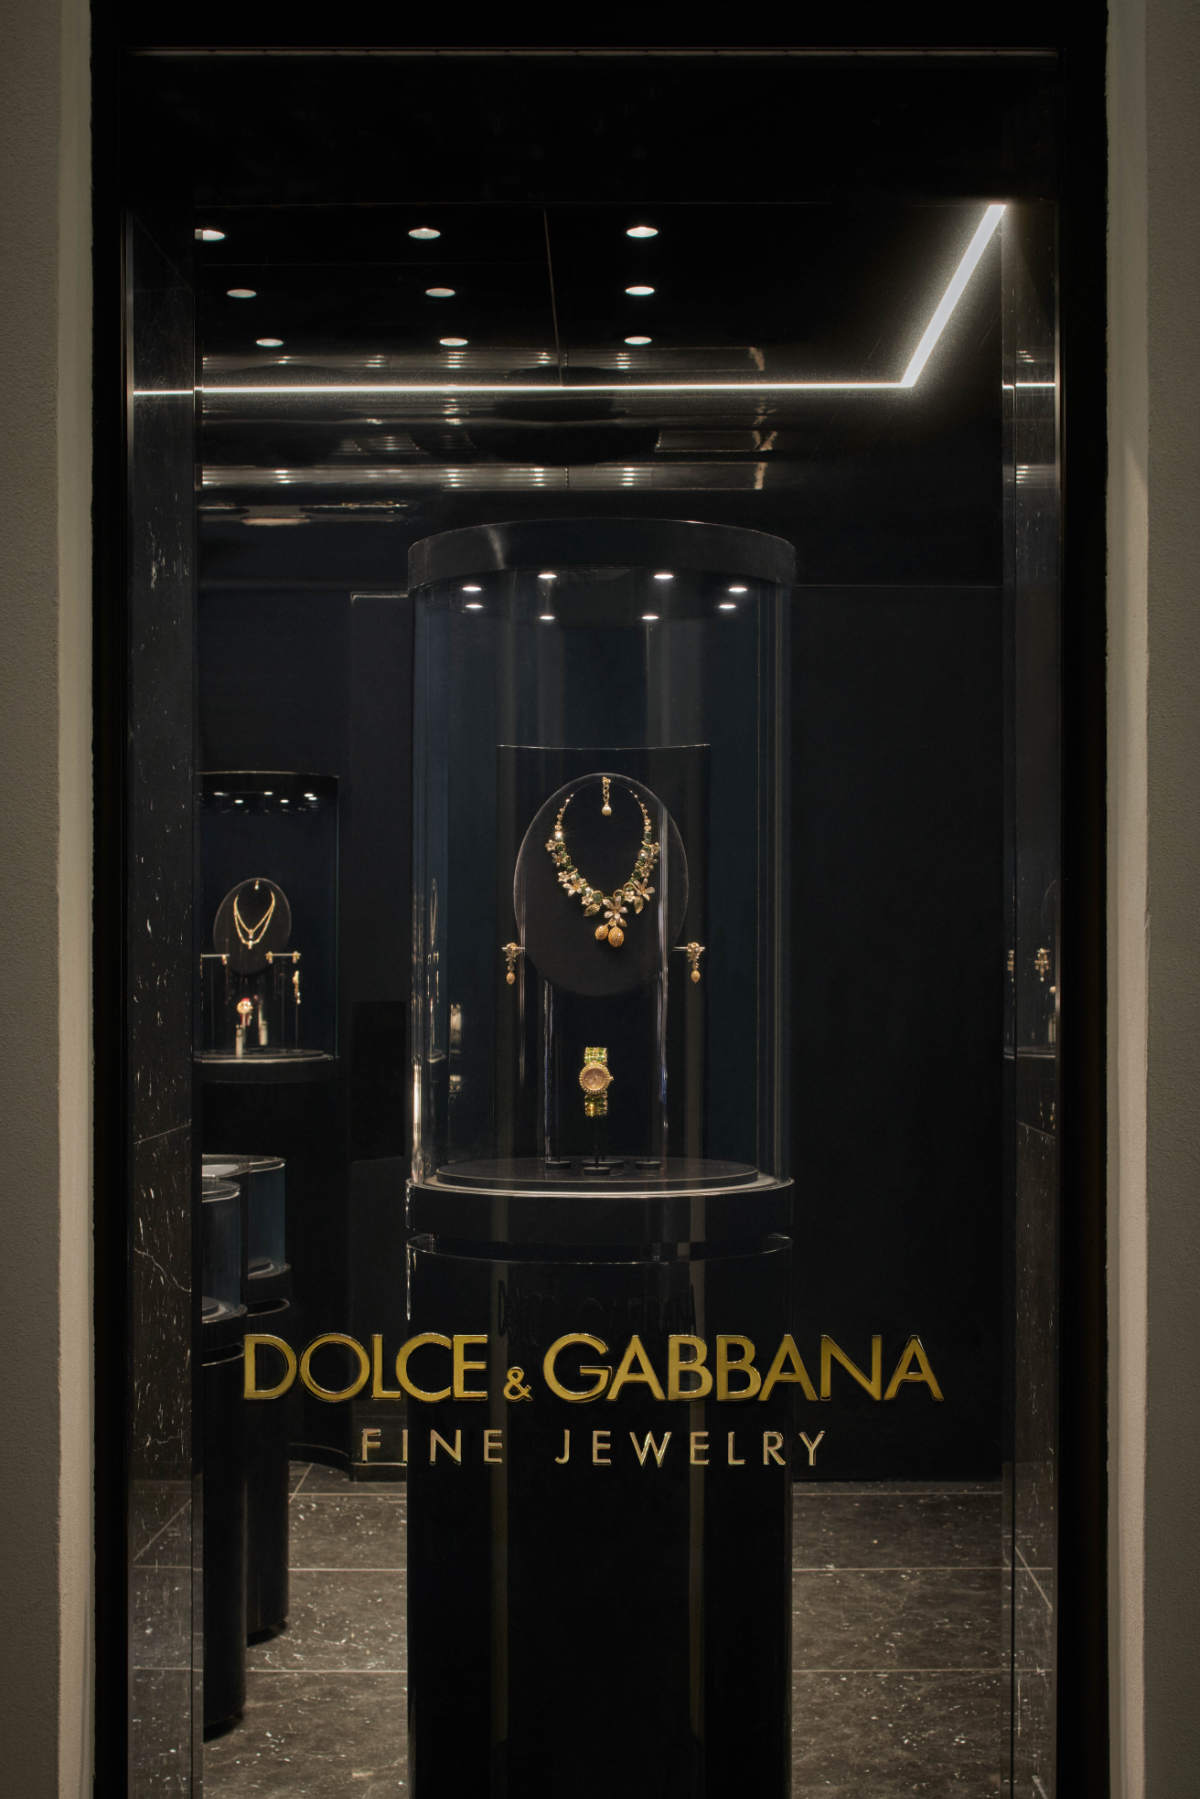 Dolce&Gabbana Opened Their World’s First Boutique Exclusively Dedicated To Fine Jewelry And Watches